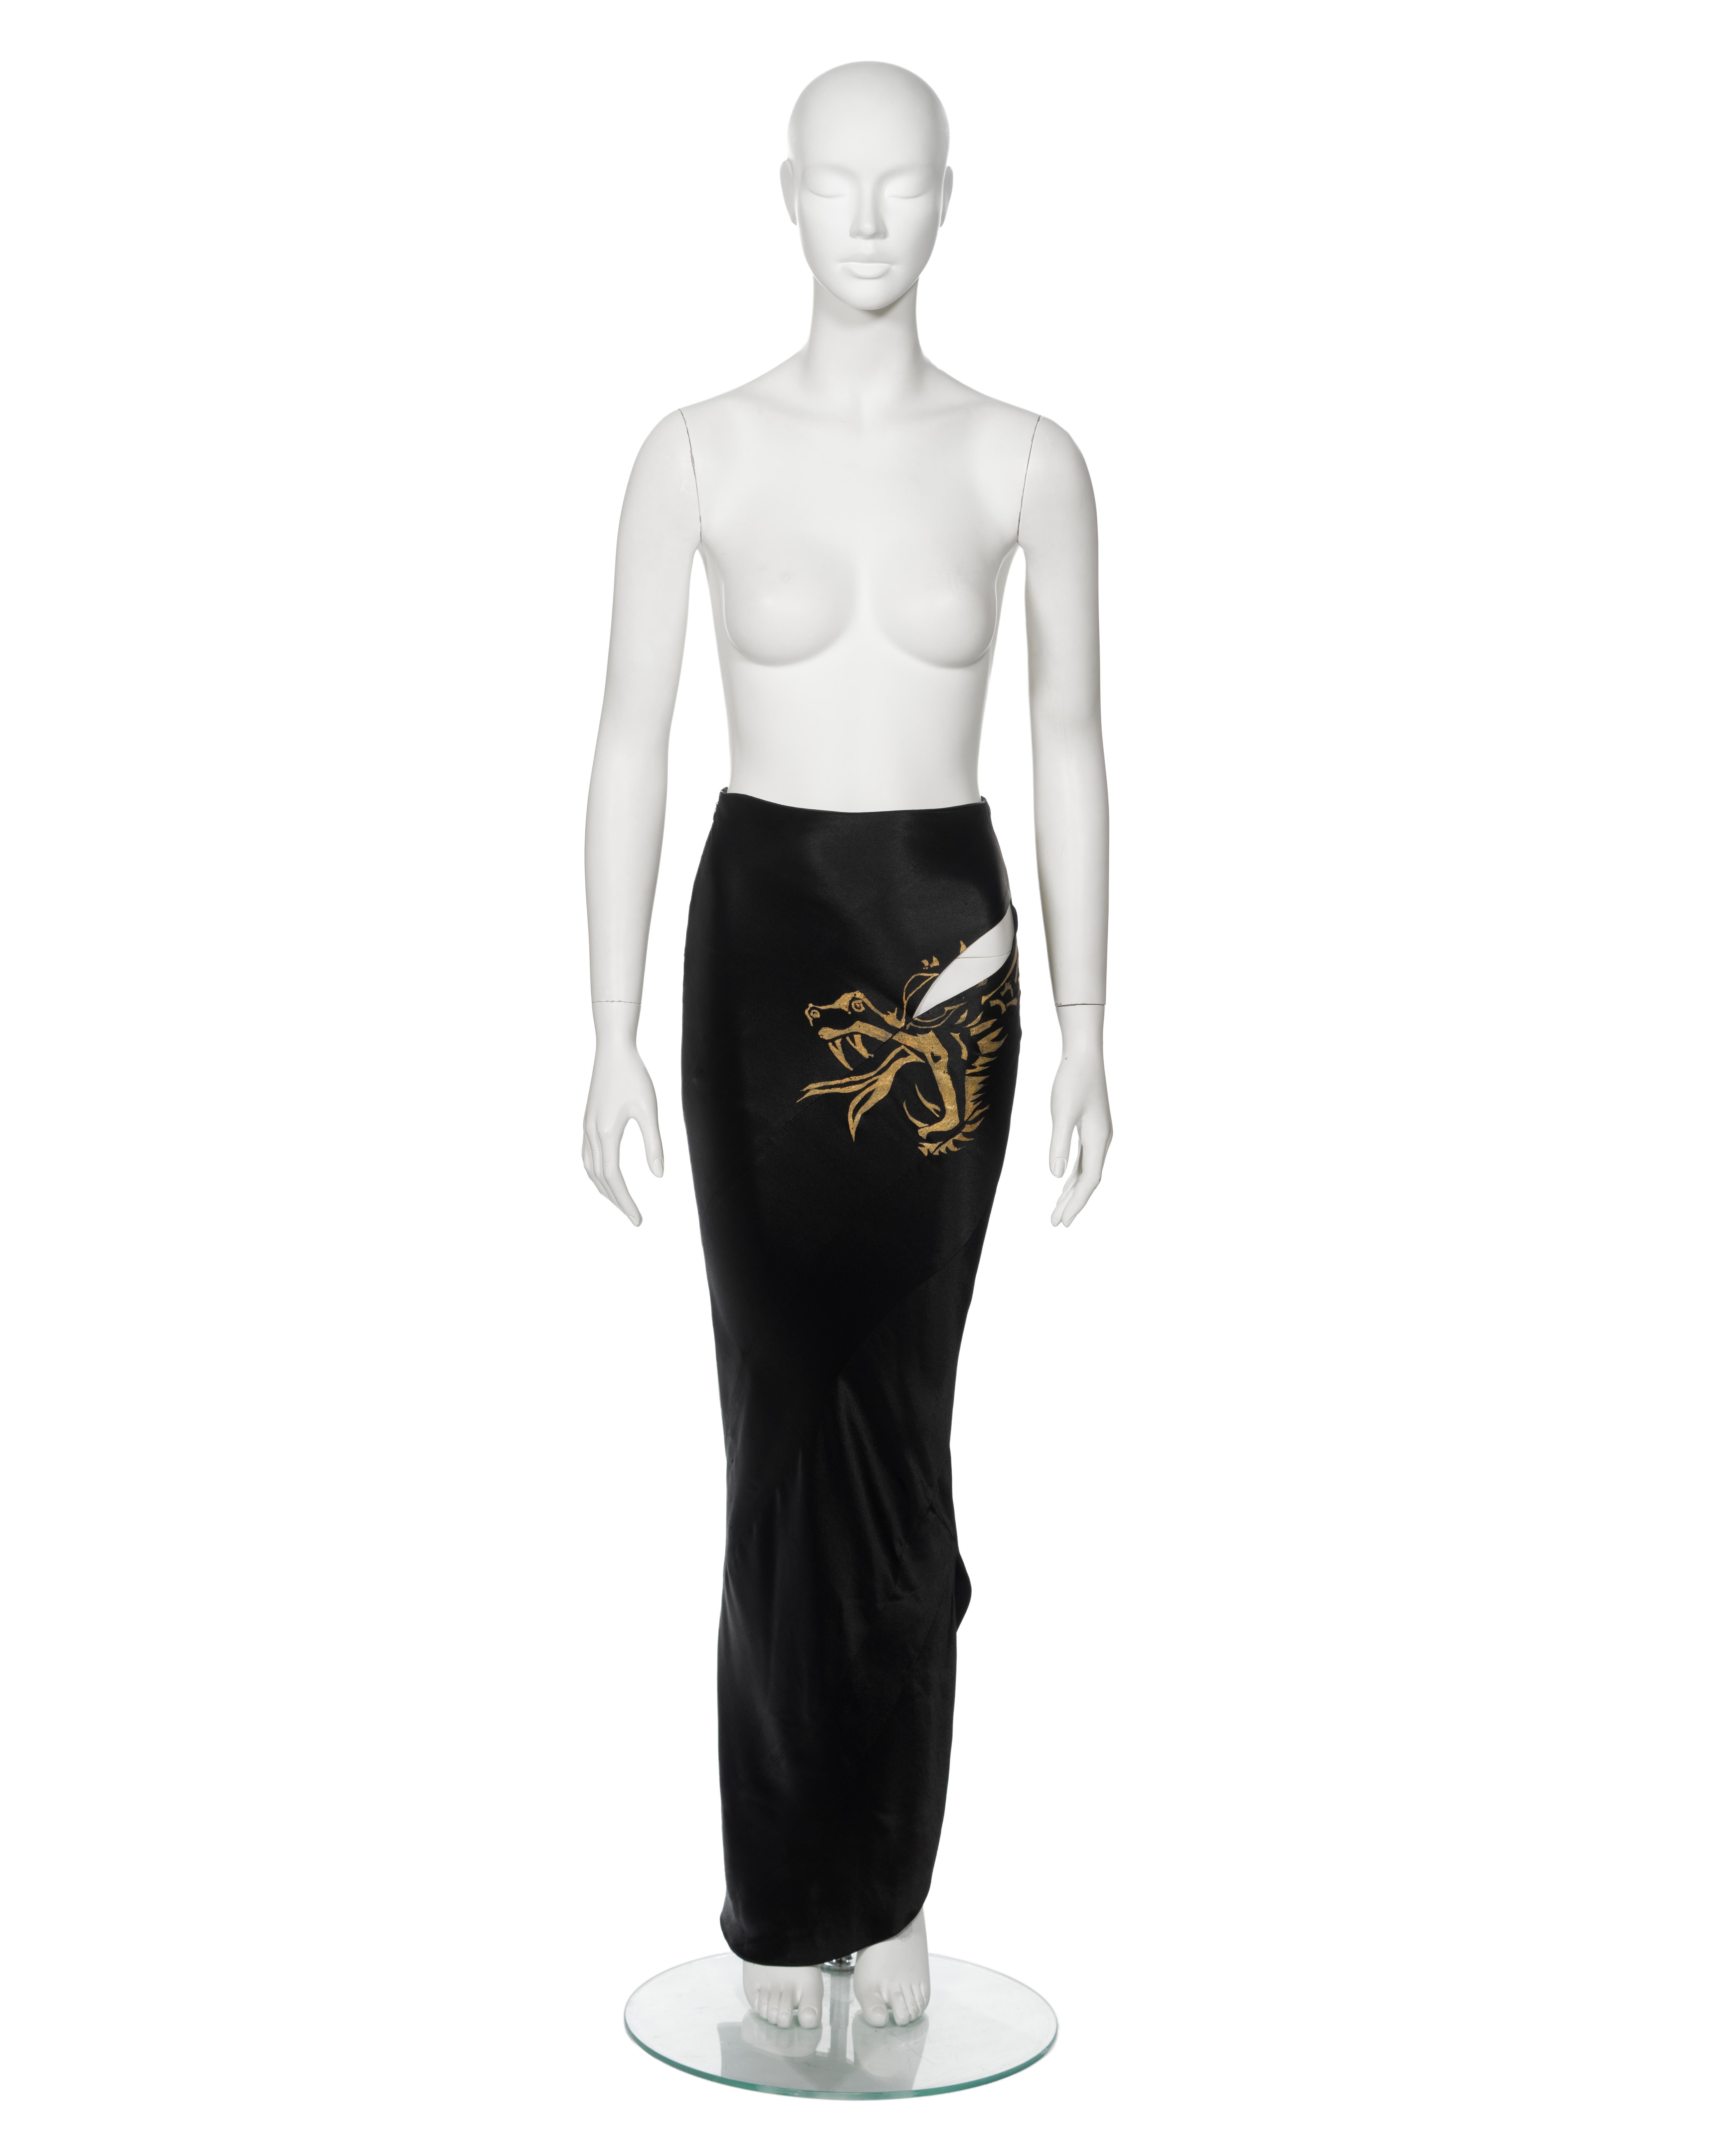 ▪ Archival John Galliano 'Filibustiers' Evening Maxi Skirt
▪ Spring-Summer 1993
▪ Sold by One of a Kind Archive
▪ Museum Grade
▪ Crafted from black bias-cut satin-cuir
▪ Showcases the collection's signature gold leaf dragon motif, originating at the